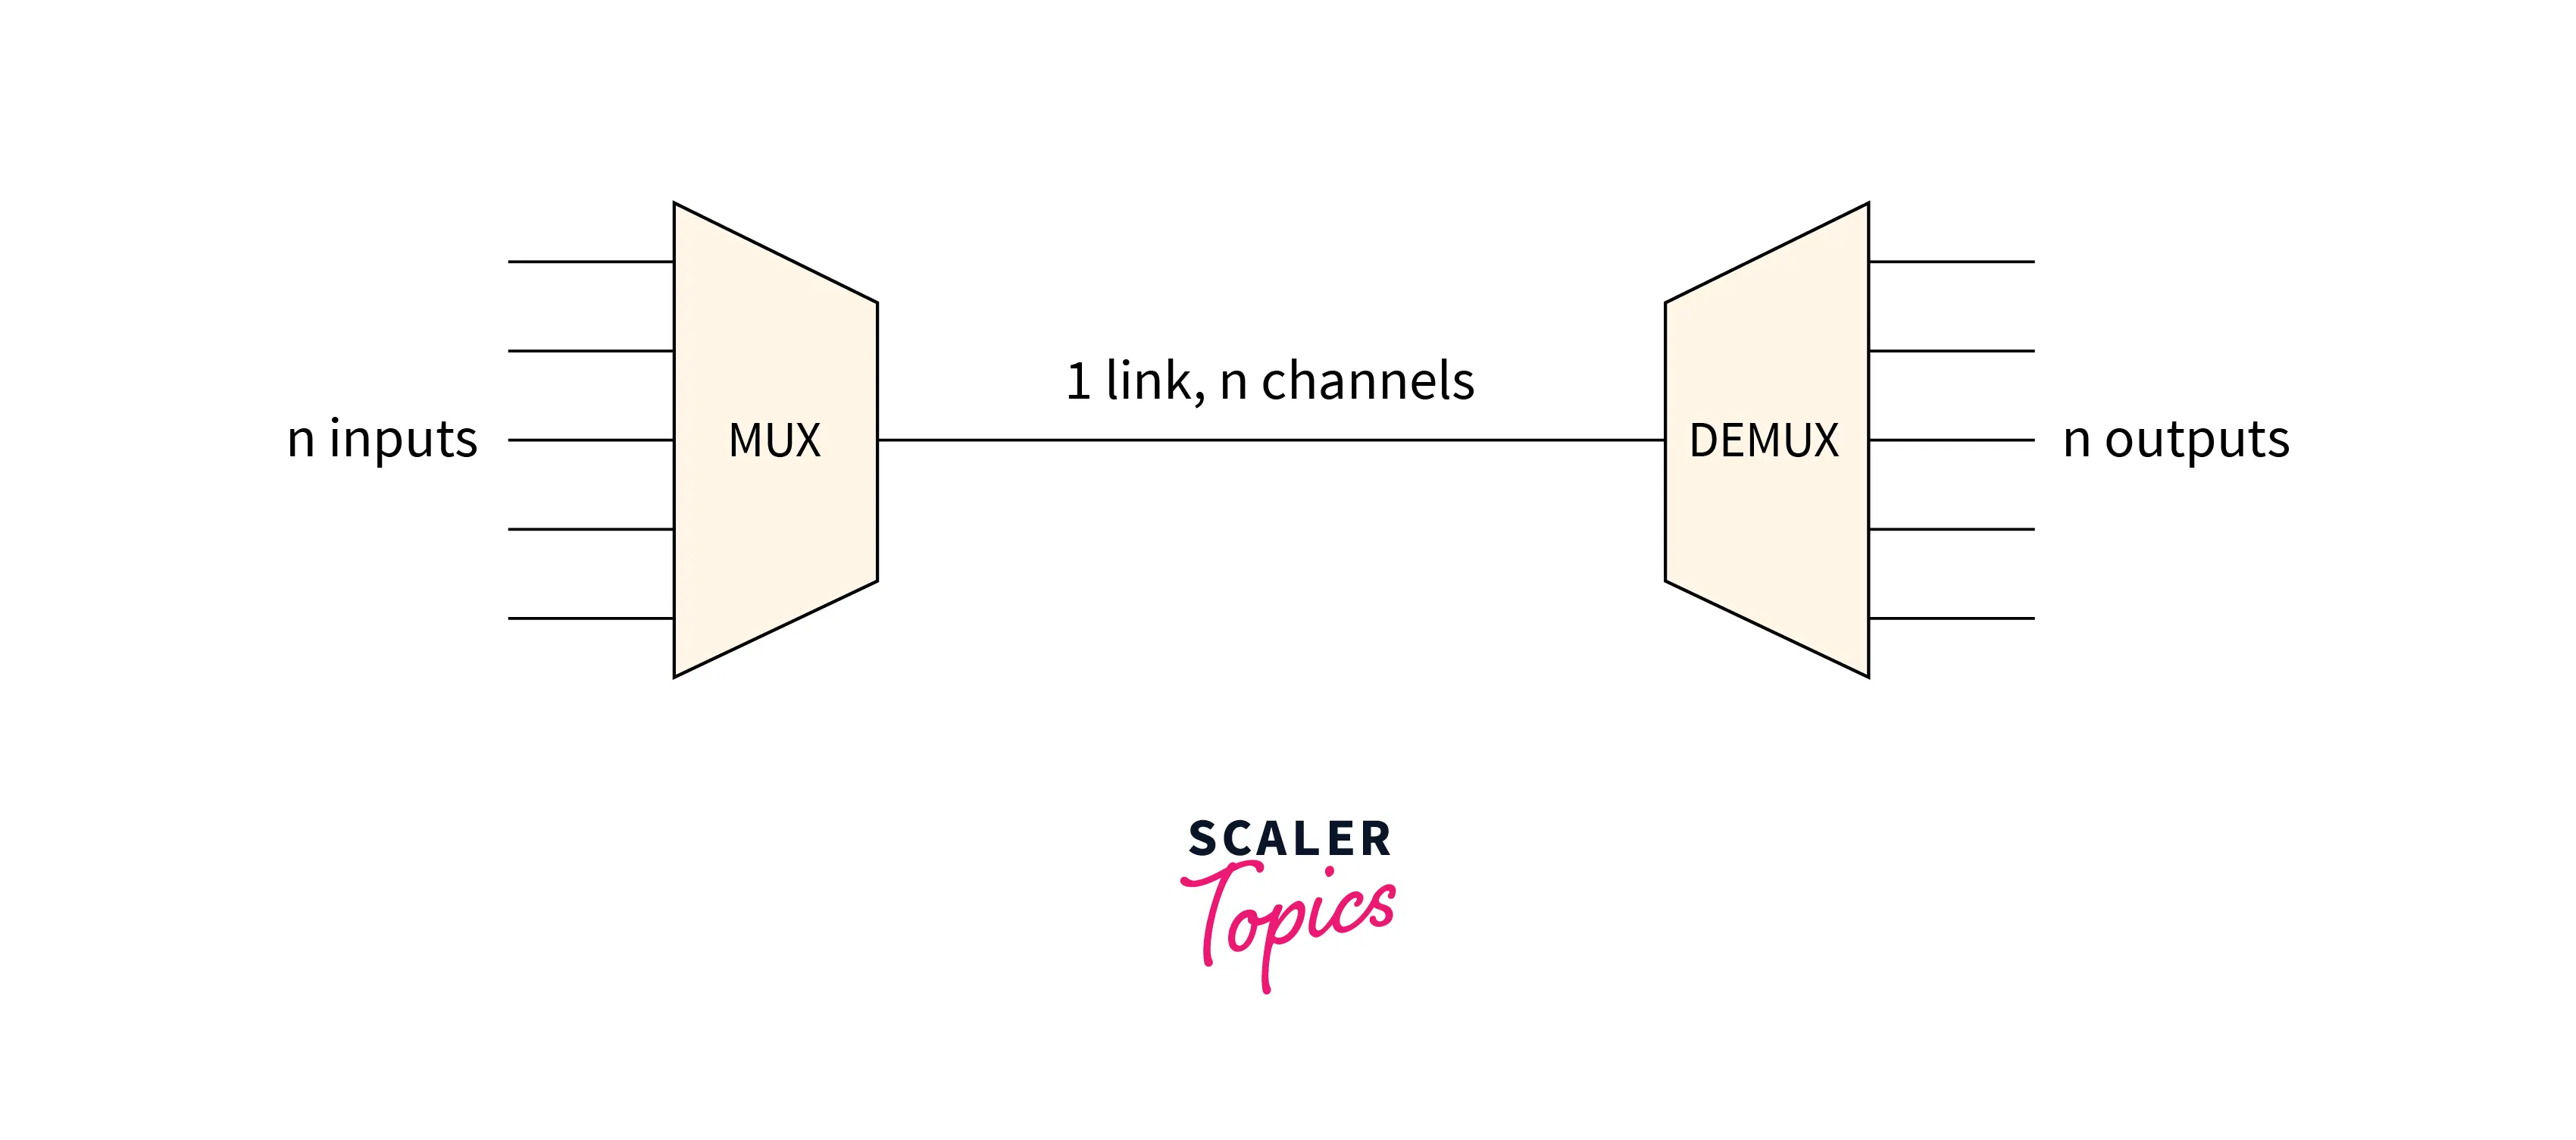 The Multiplexer (MUX) and Multiplexing Tutorial